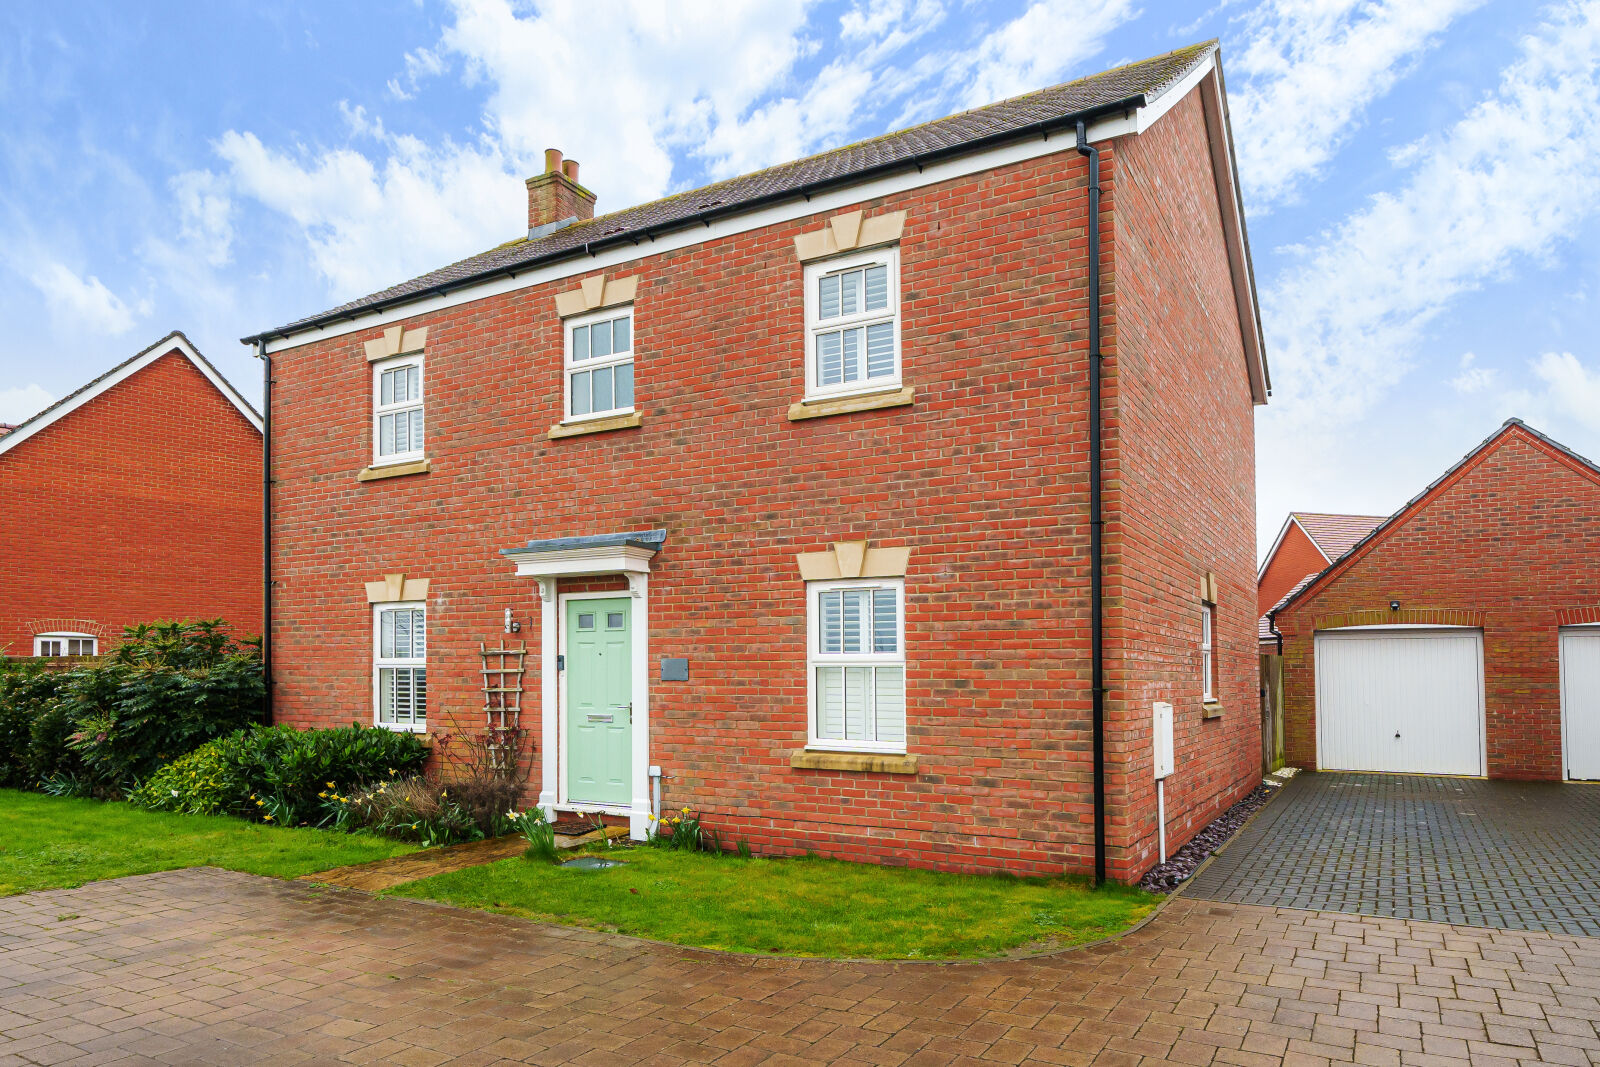 4 bedroom detached house for sale Badgers Drive, Wantage, OX12, main image